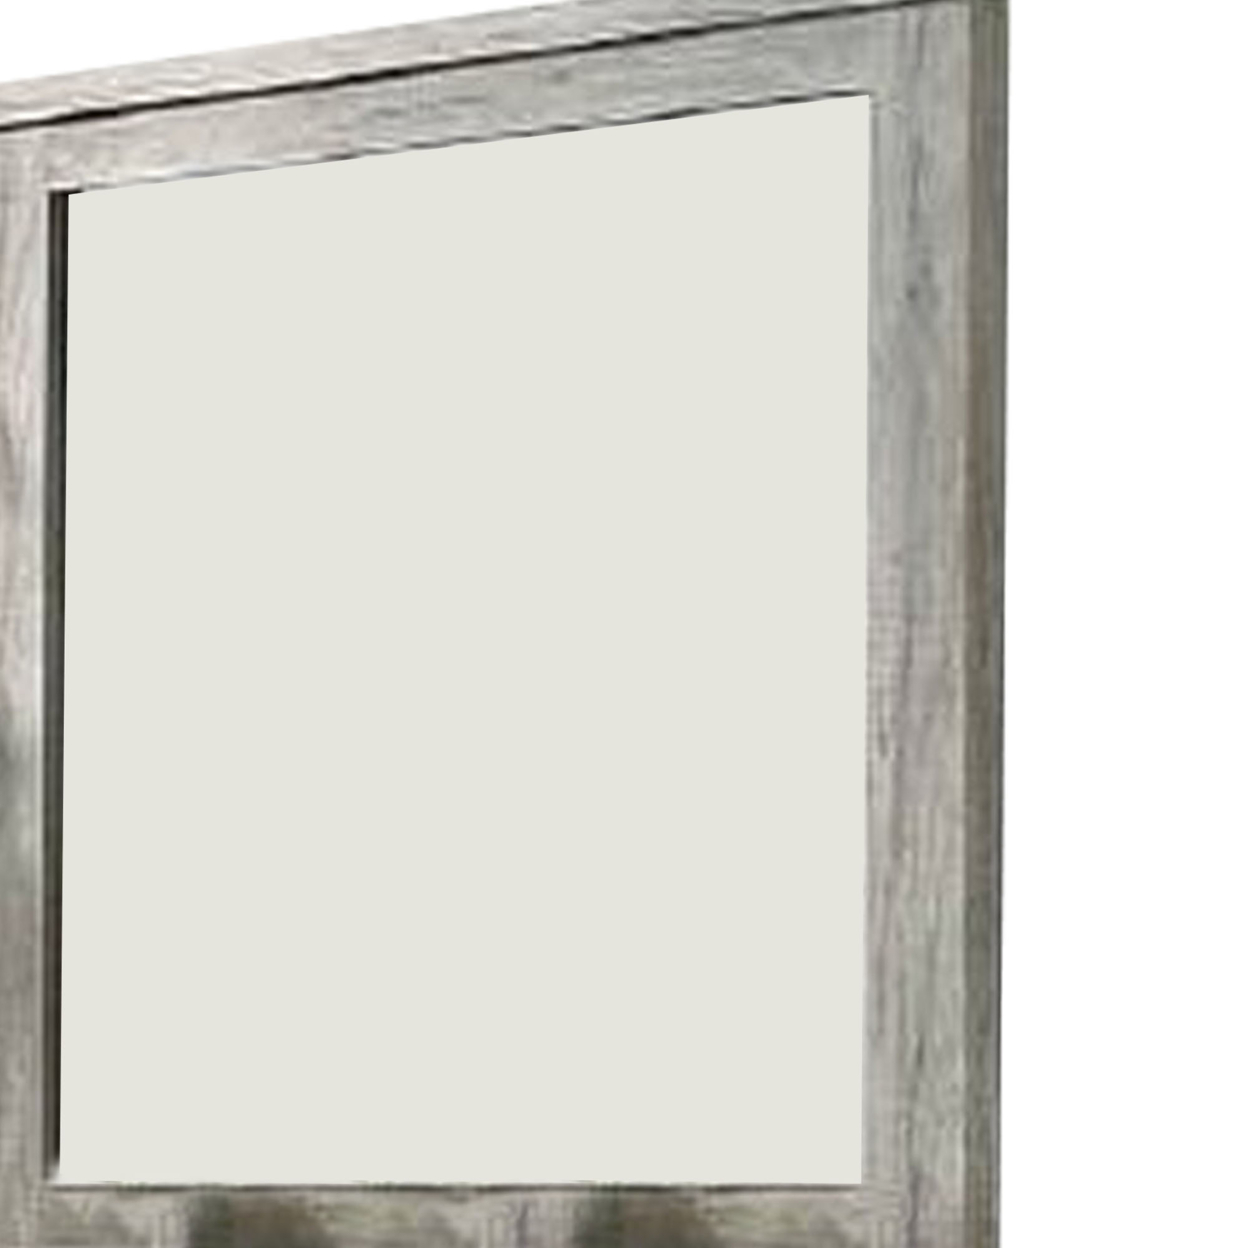 Wall Mirror With Rectangular Frame And Molded Details, Gray- Saltoro Sherpi